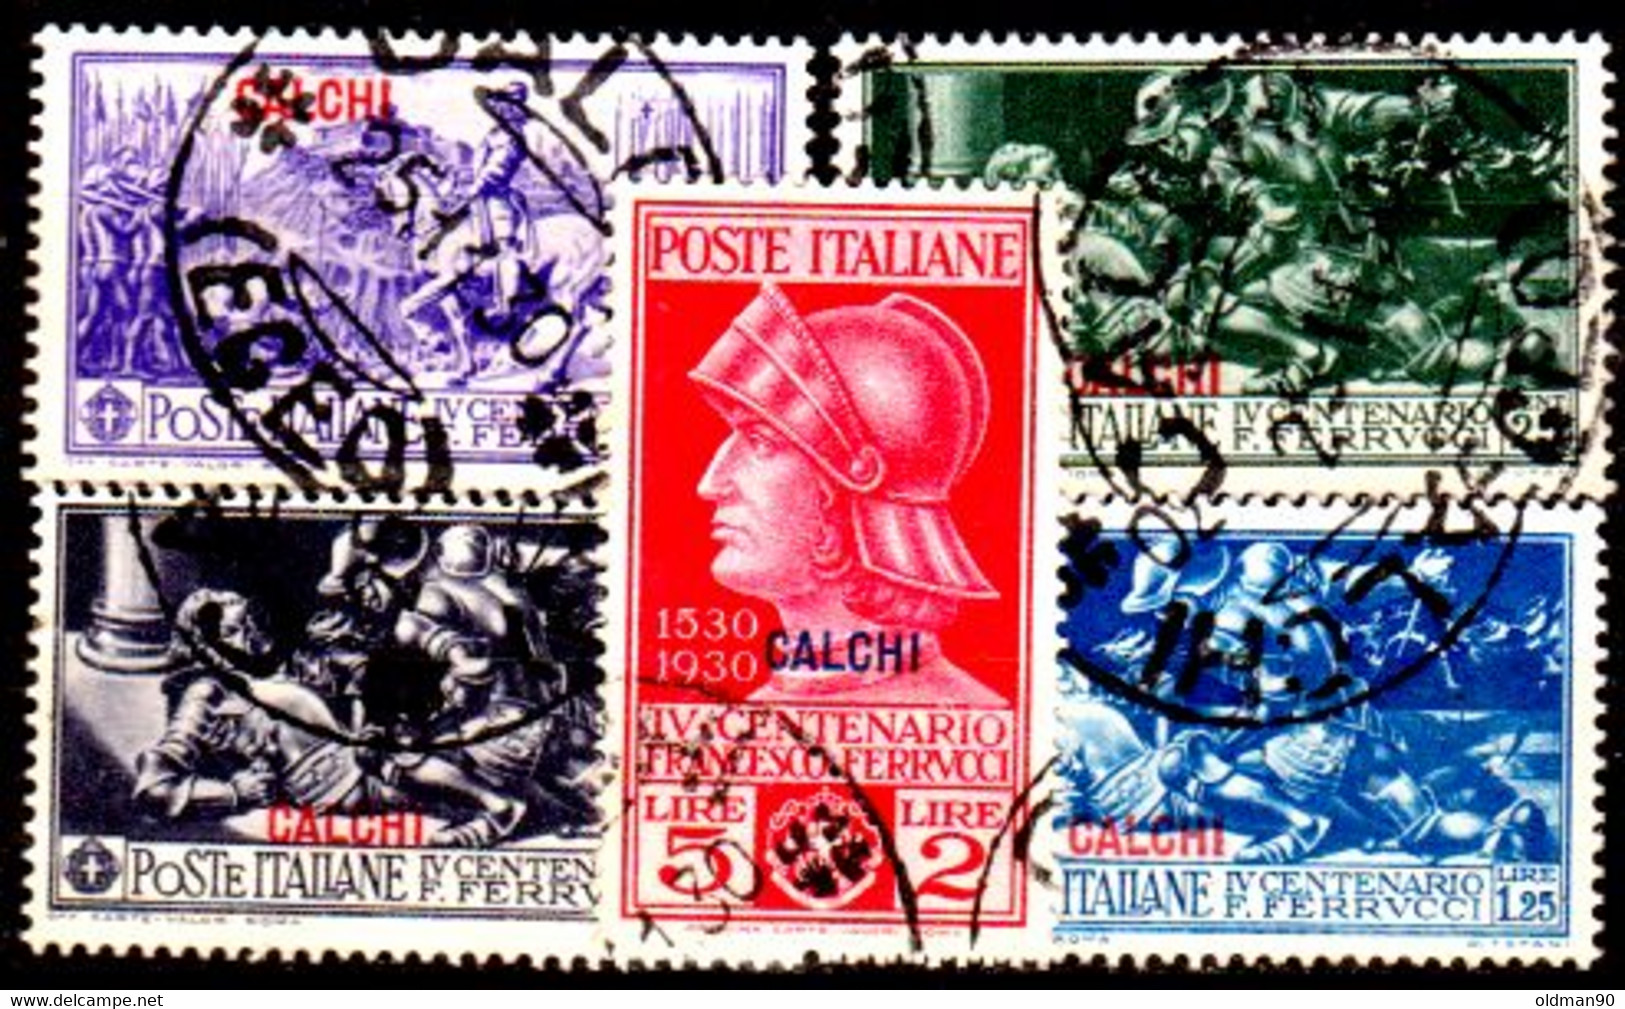 Egeo-OS-273- Carchi: Original Stamp "Ferrucci" And Overprint 1930 (o) Obliterated - Quality In Your Opinion. - Egeo (Calino)